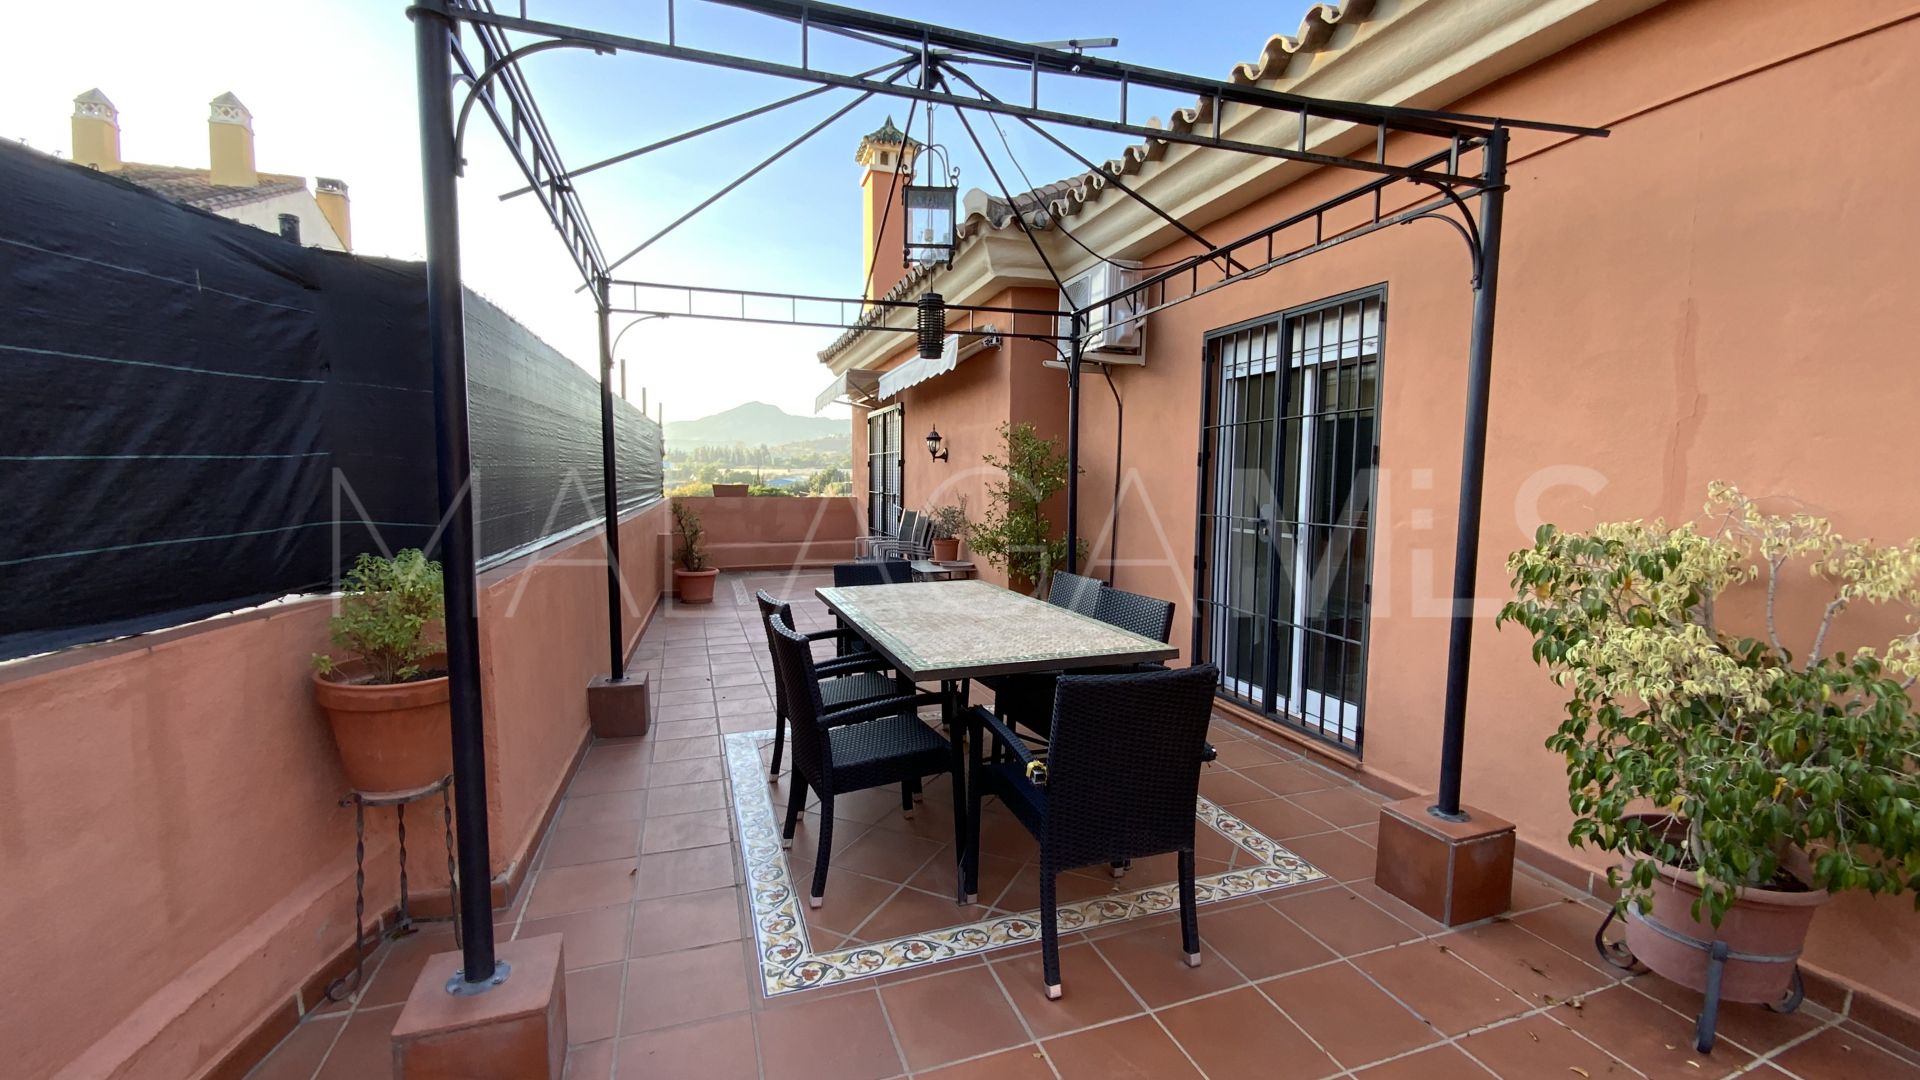 El Gamonal, chalet with 4 bedrooms for sale